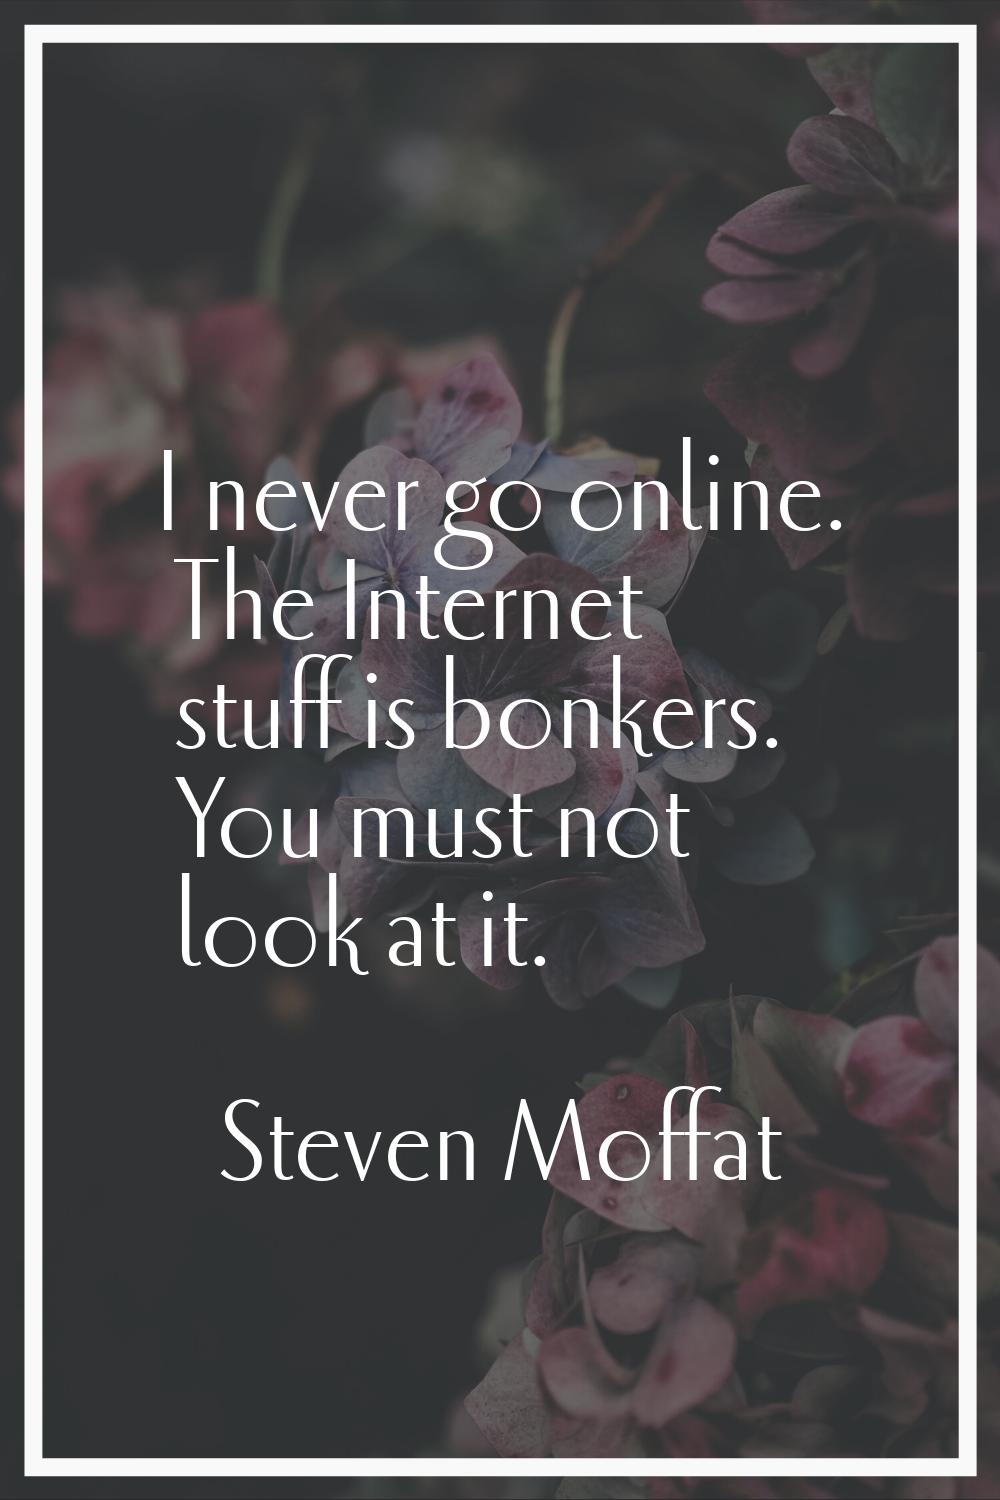 I never go online. The Internet stuff is bonkers. You must not look at it.